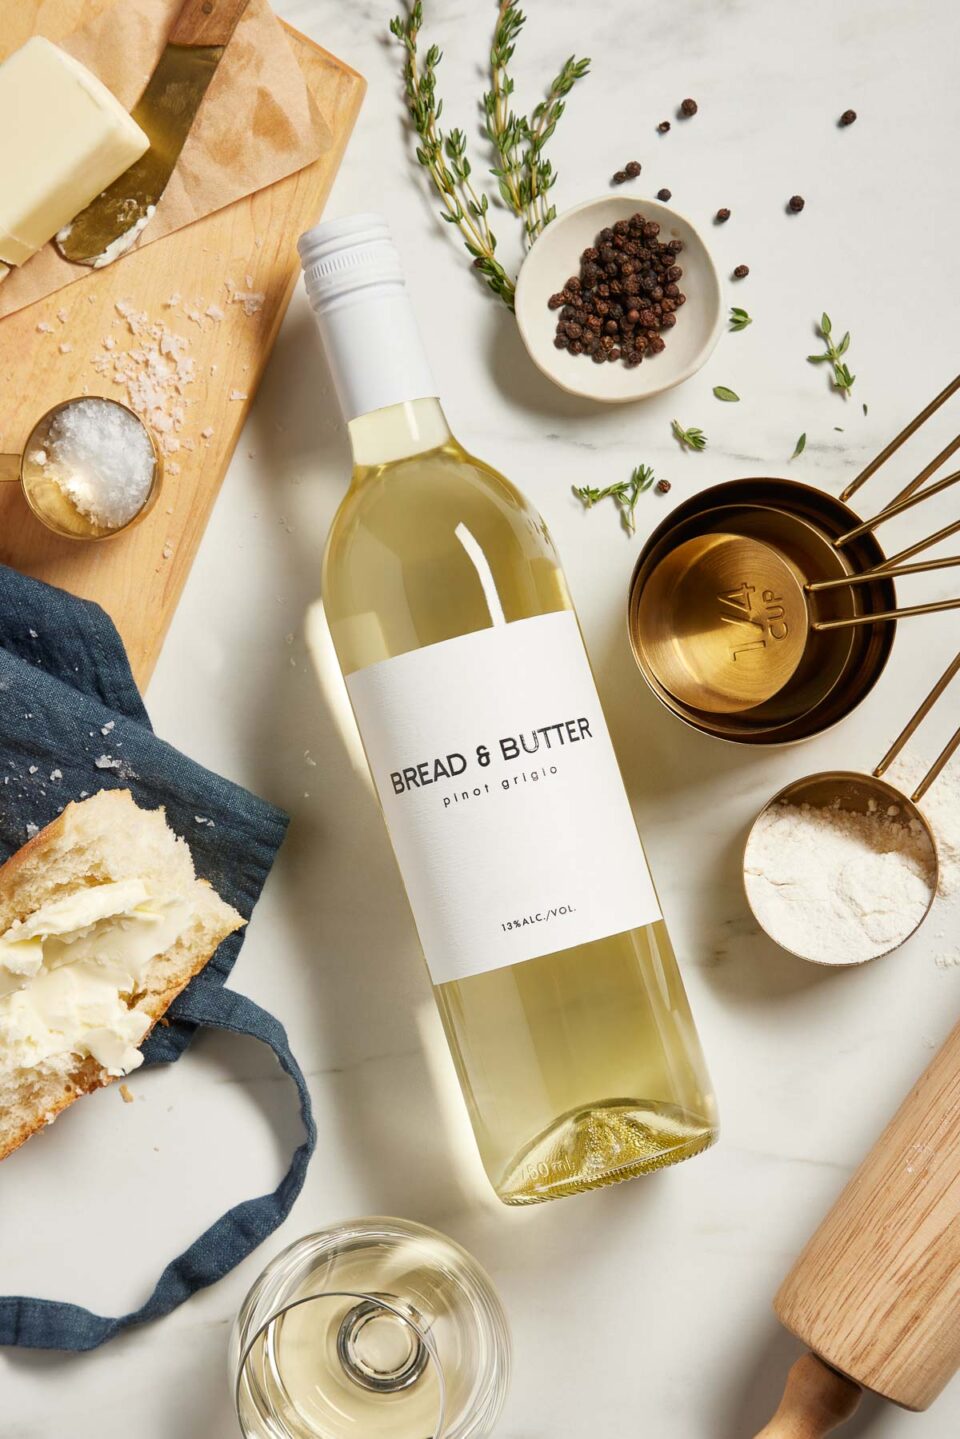 A bottle of Bread & Butter California Pinot Grigio lays flat atop a creamy white textured surface with the label facing upwards. It's surrounded by measuring cups & small bowls filled with ingredients like flour, peppercorns, & fresh herbs.